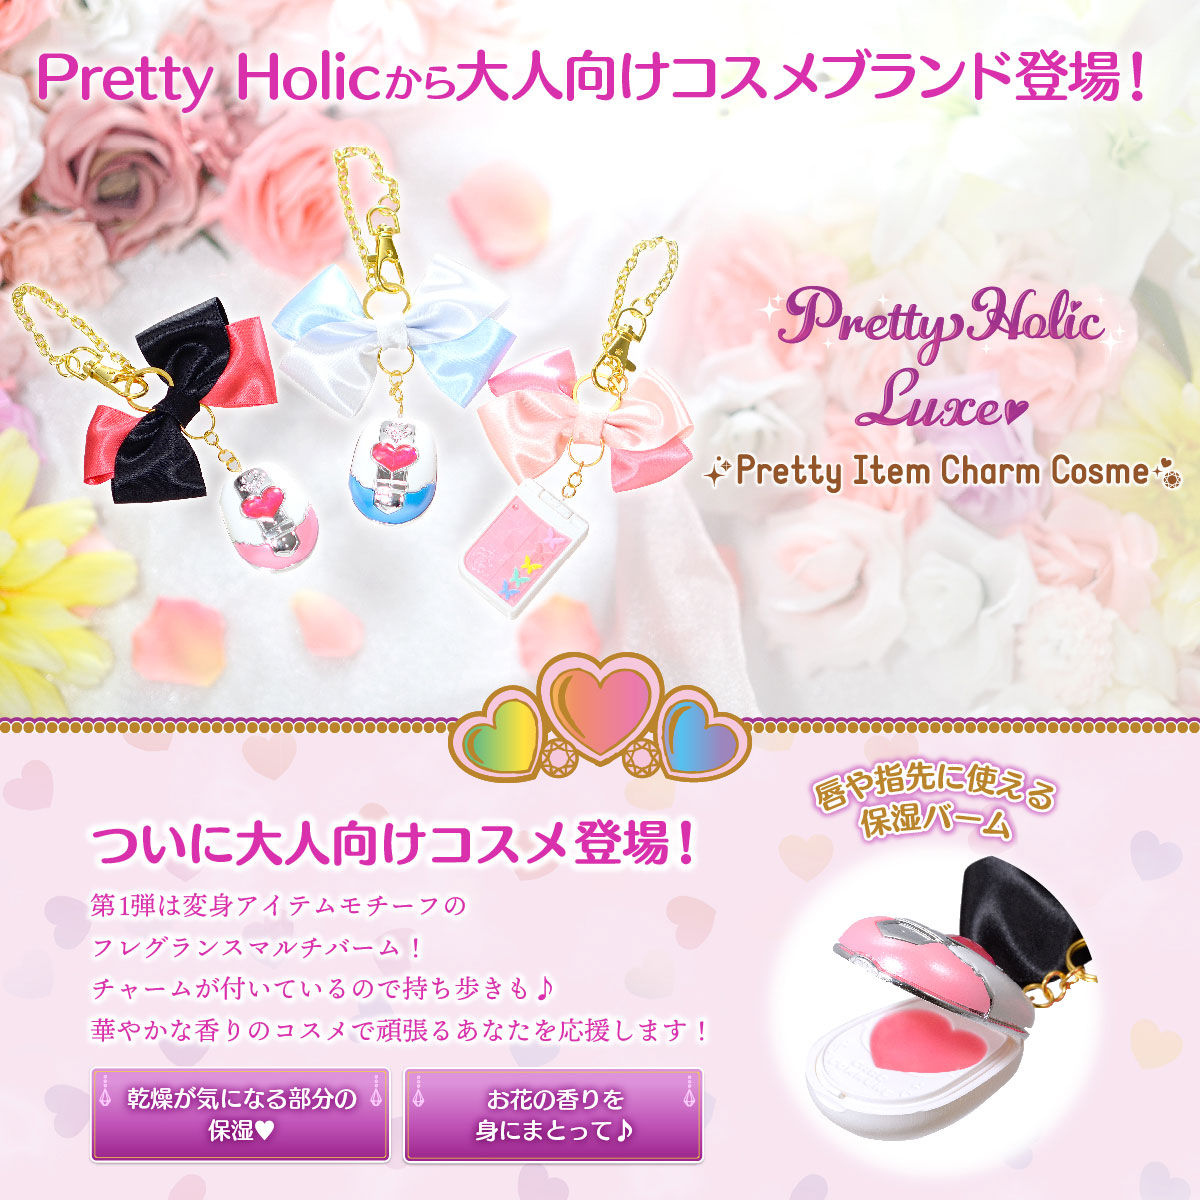 Pretty Holic Luxe プリティアイテムチャームコスメ | プリキュア 